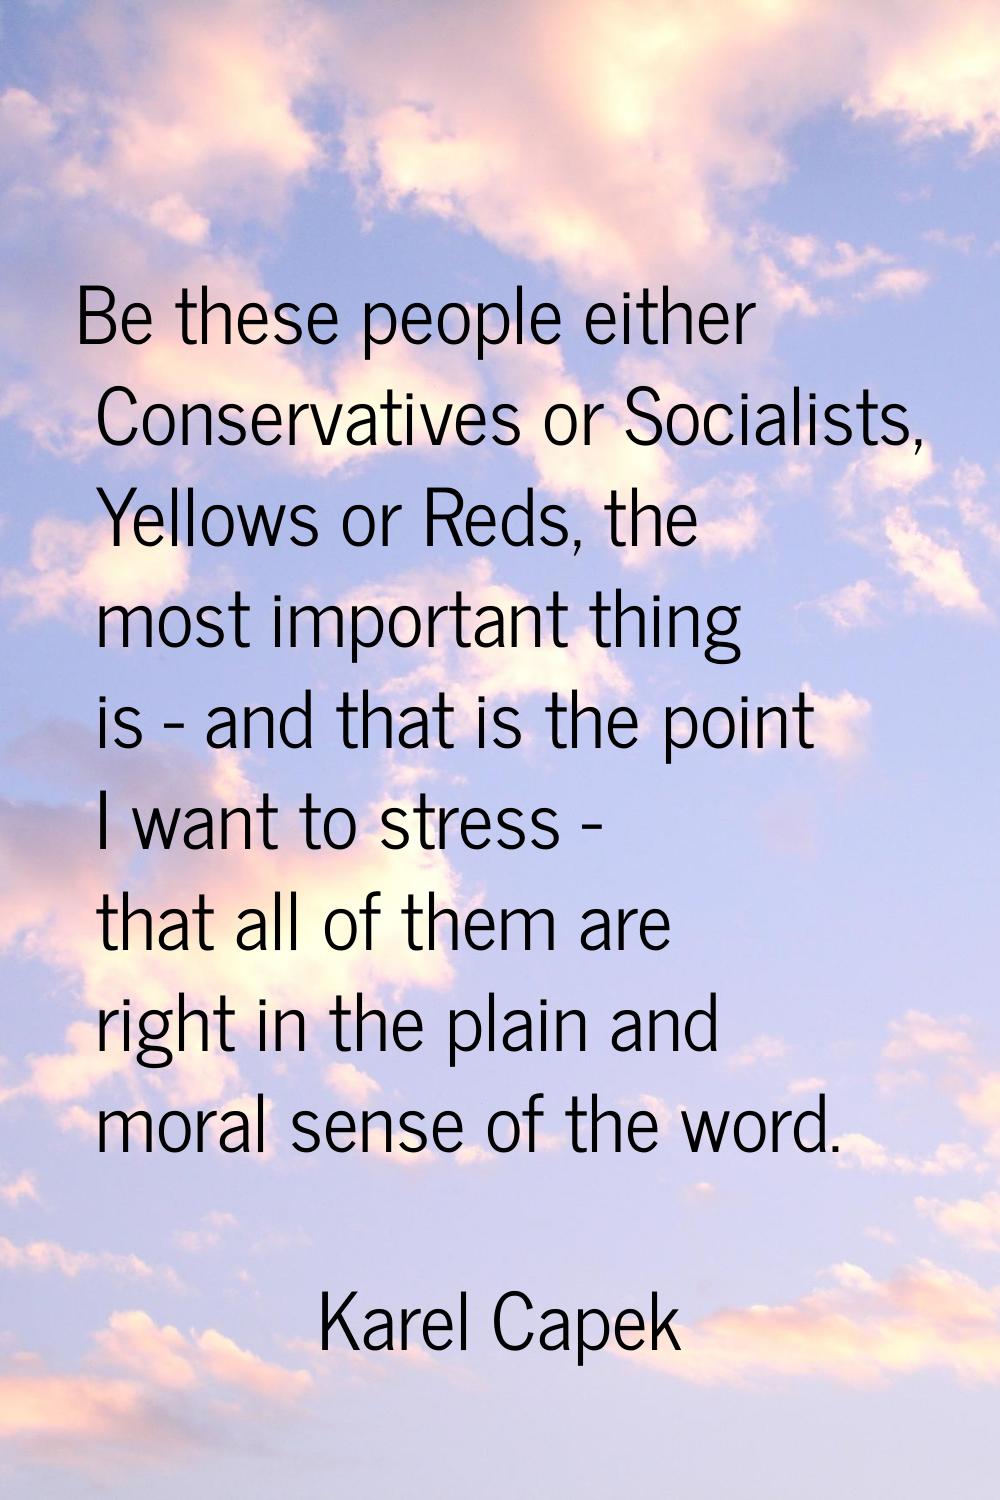 Be these people either Conservatives or Socialists, Yellows or Reds, the most important thing is - 